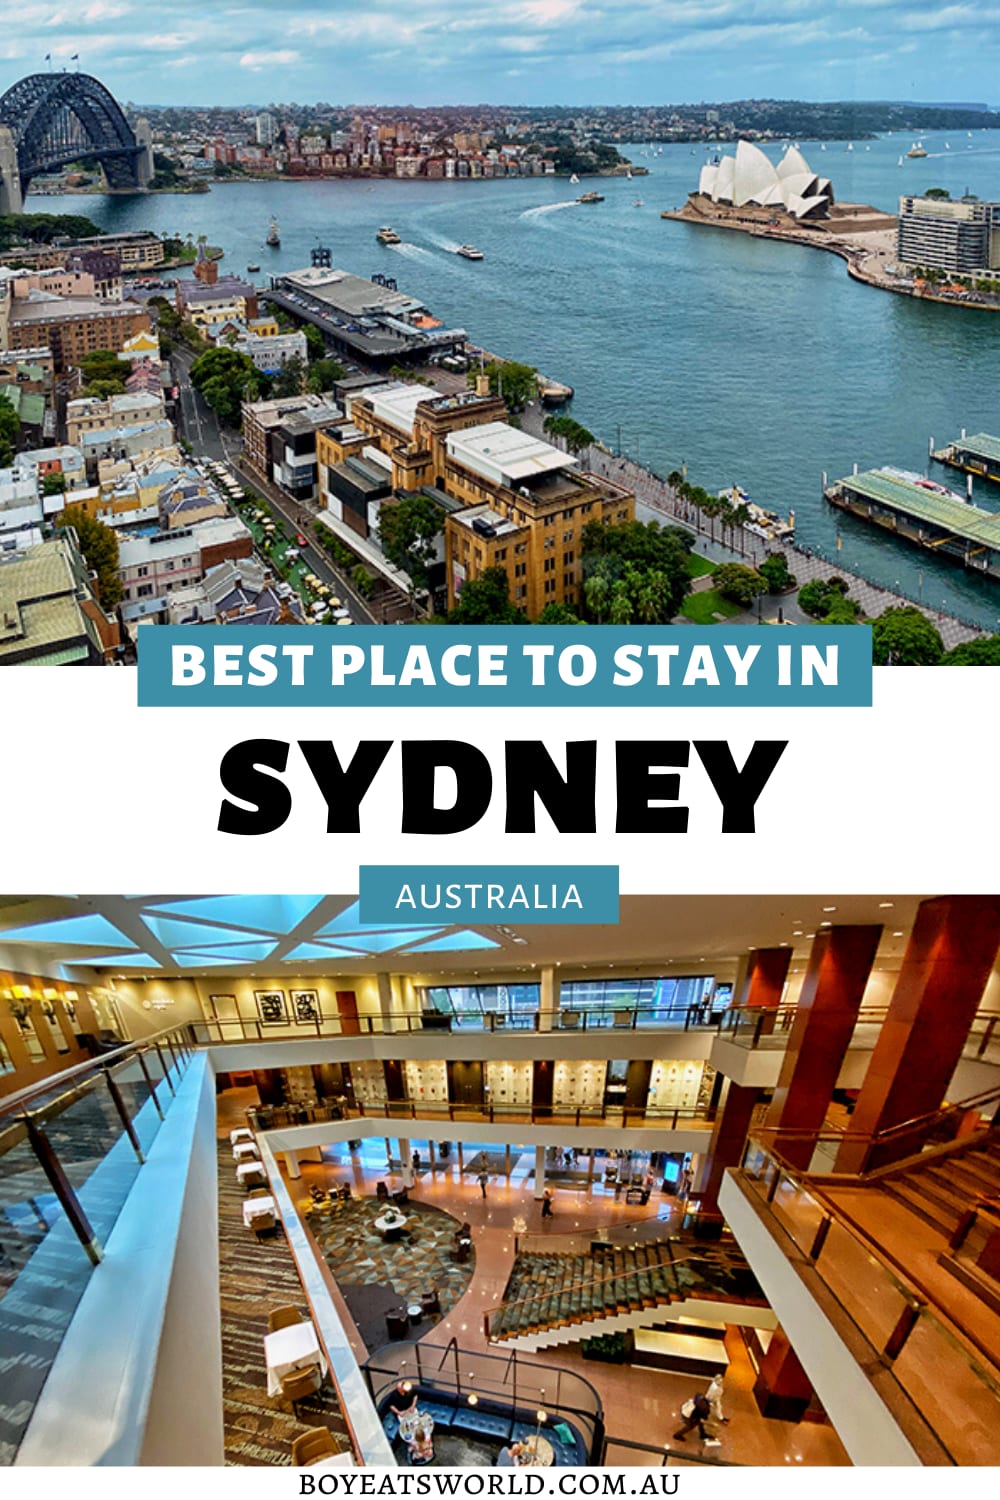 Best Place to Stay in Sydney, Australia